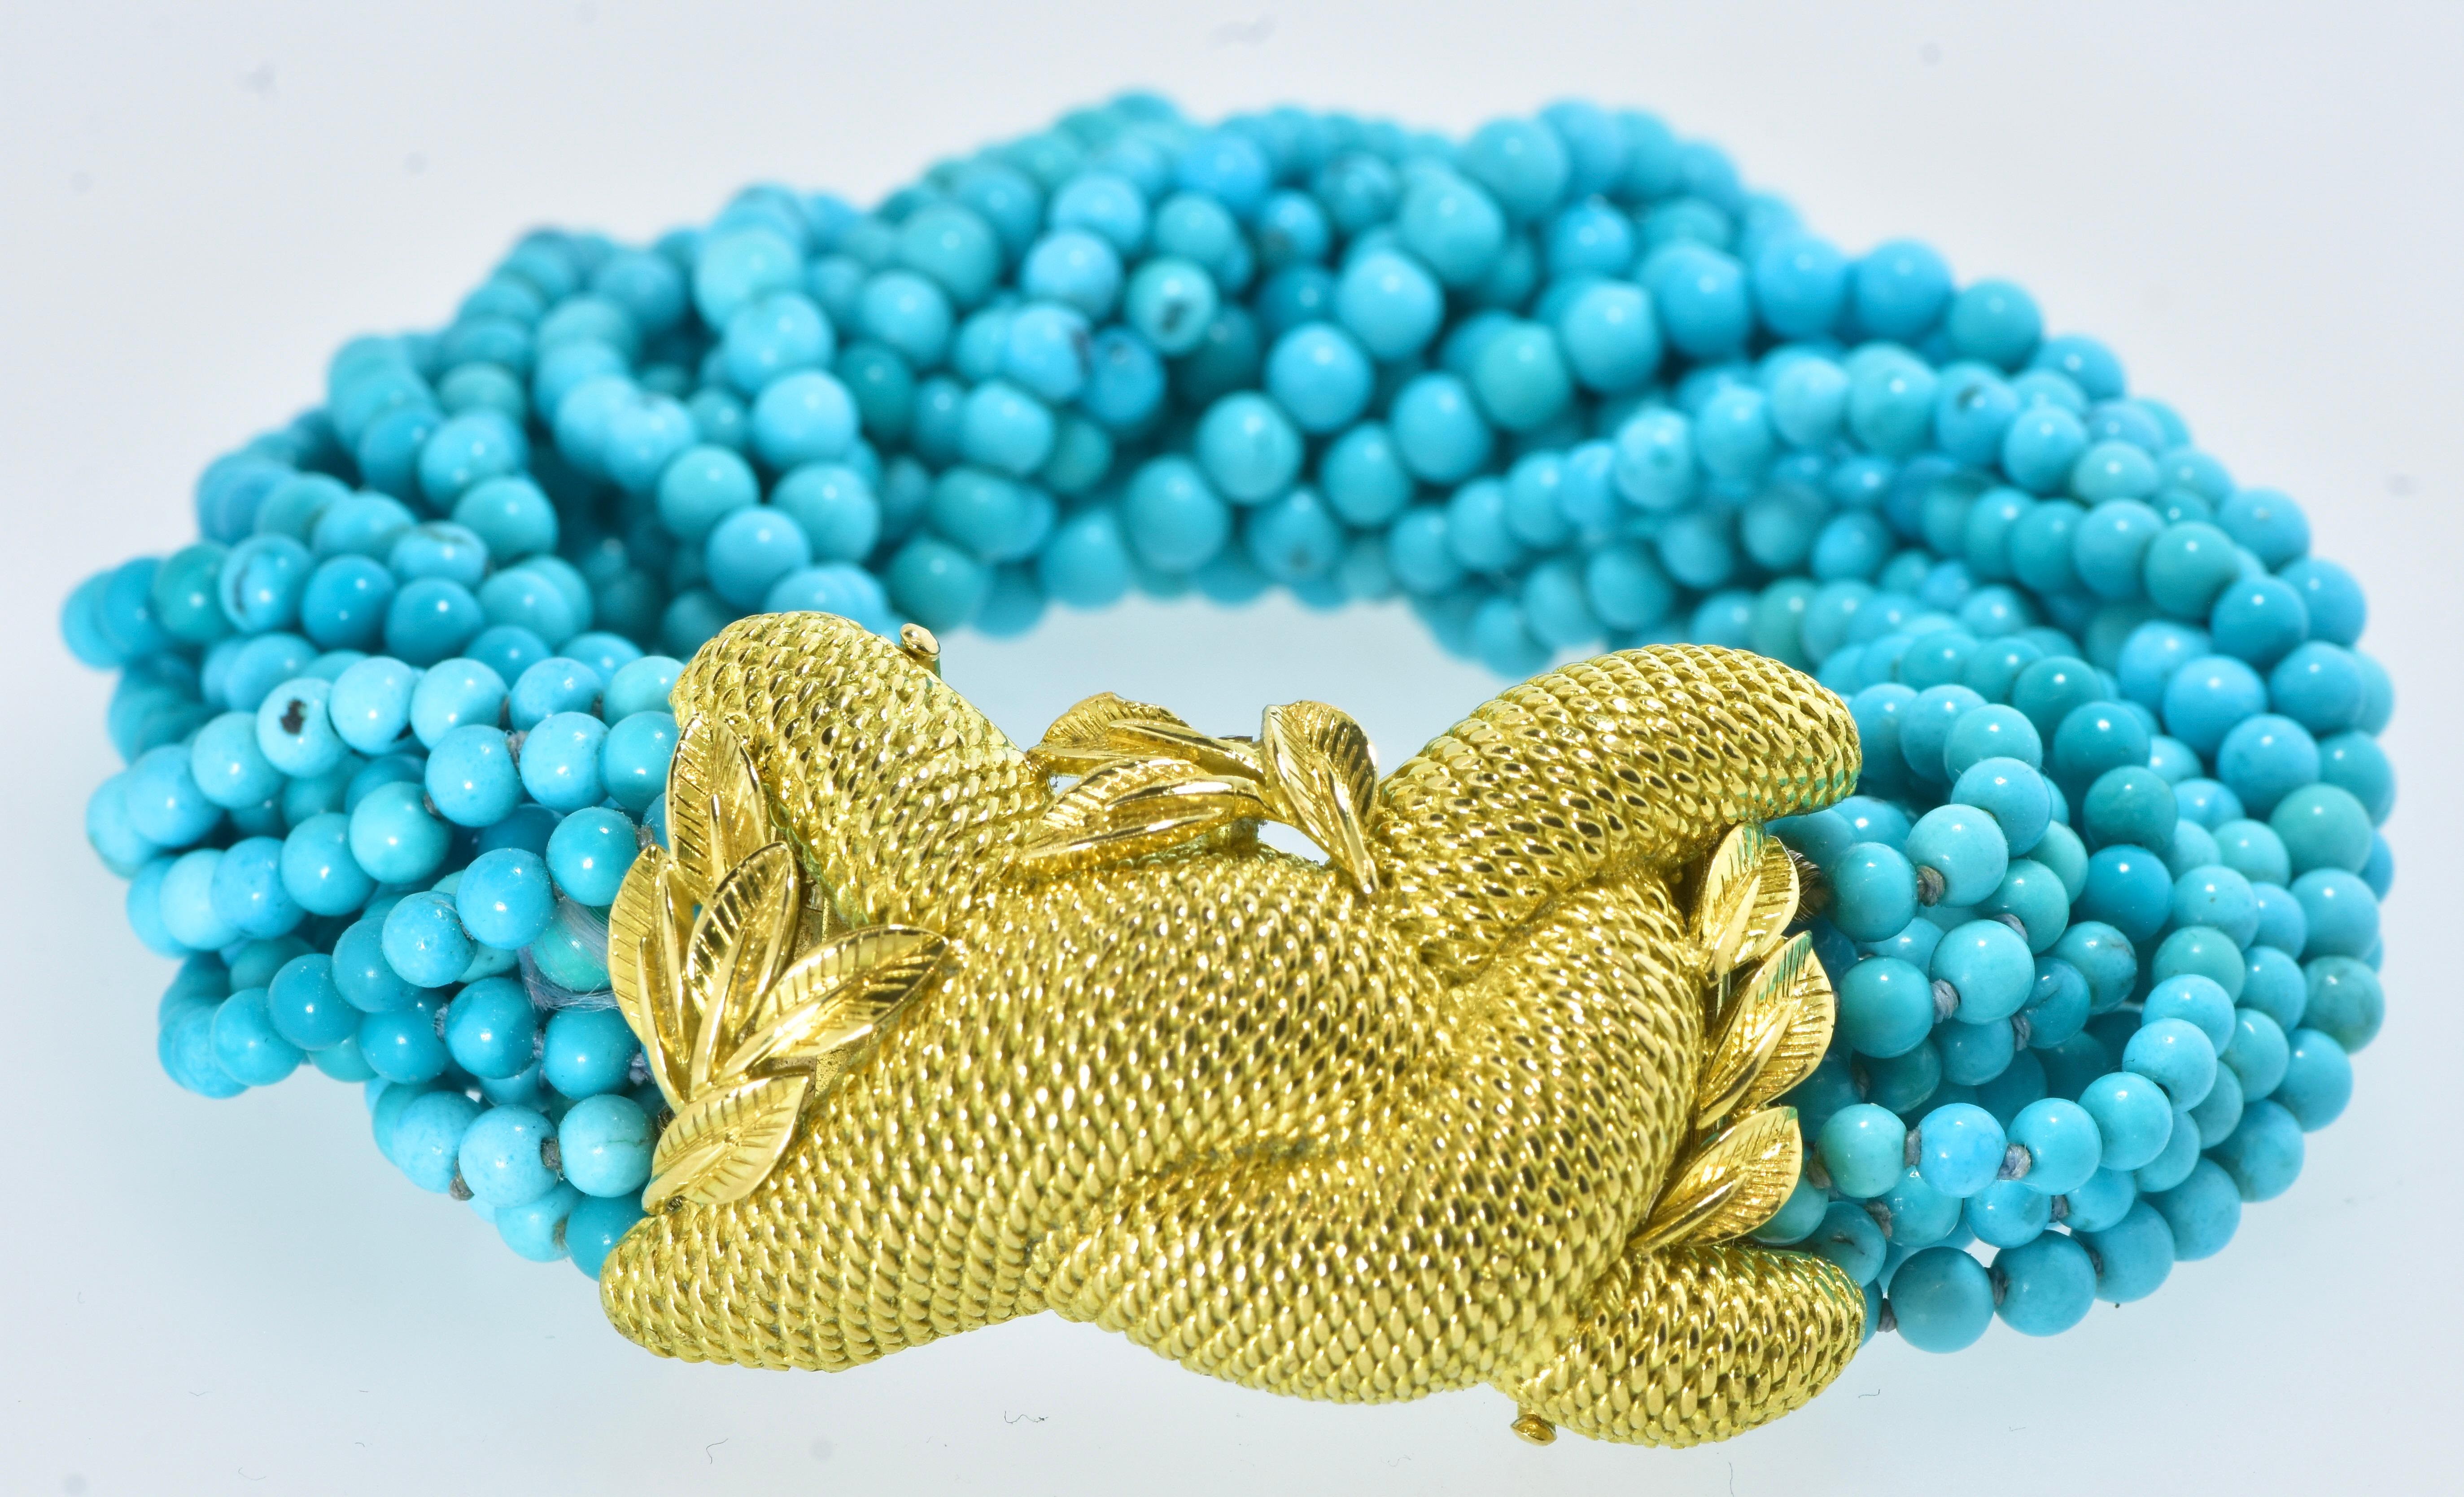 Fine Turquoise Bead Torsade Bracelet Centering an 18K High Relief Clasp, c. 1965 For Sale 8